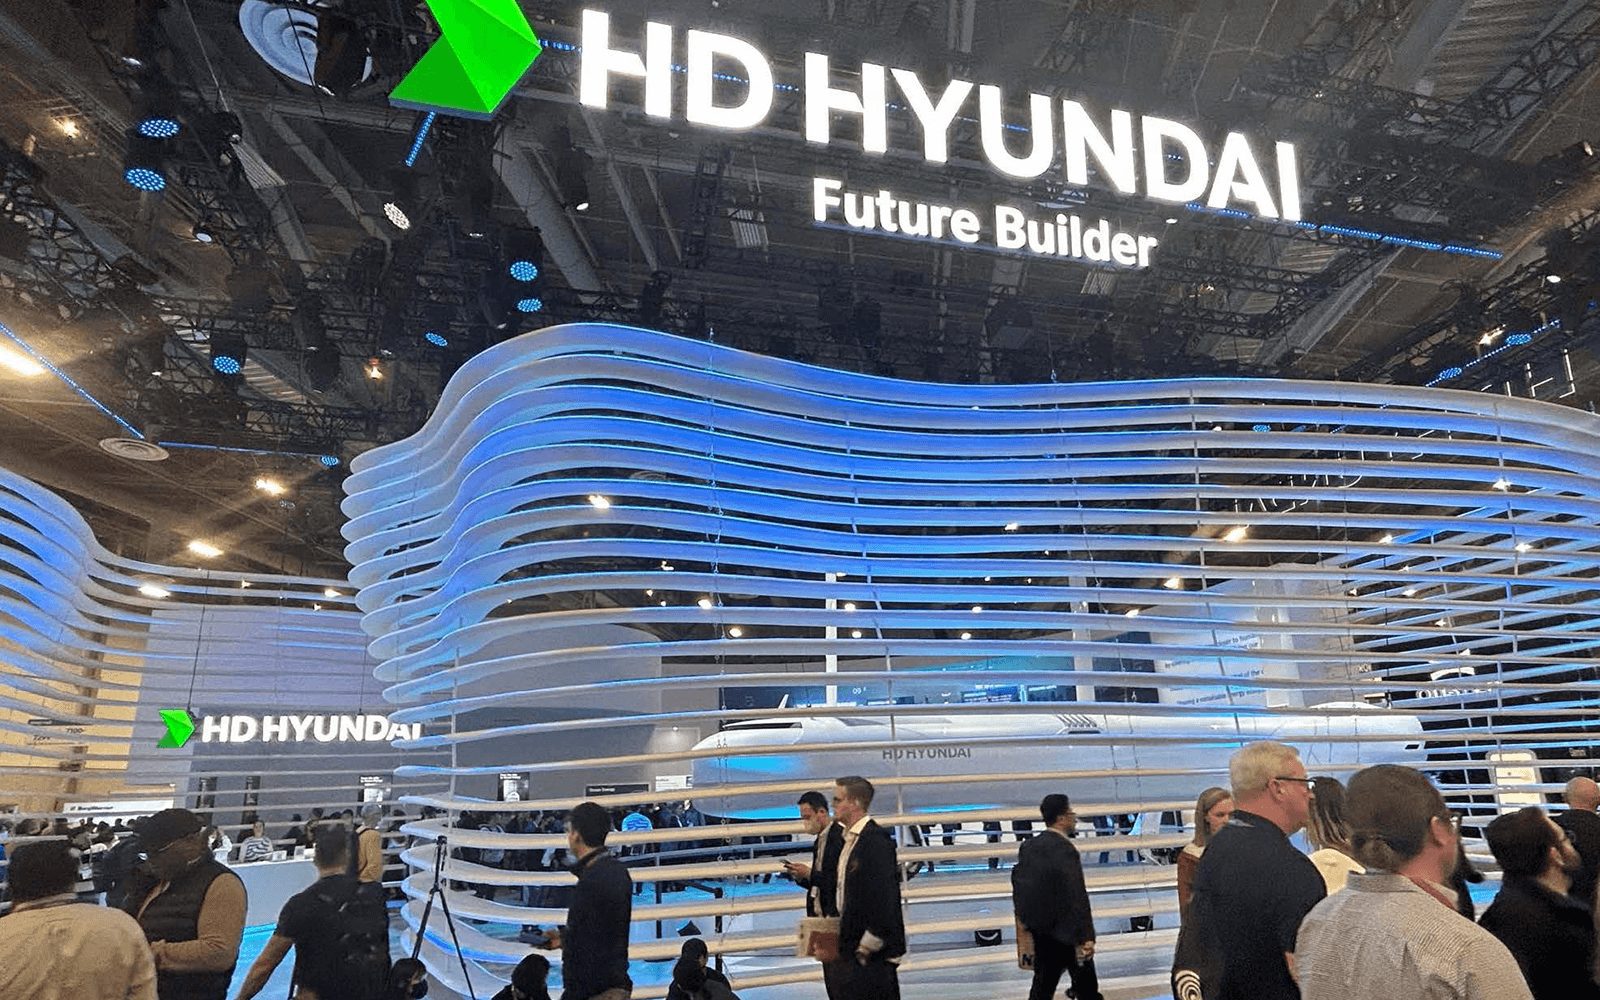 The exterior of the HD Hyundai booth